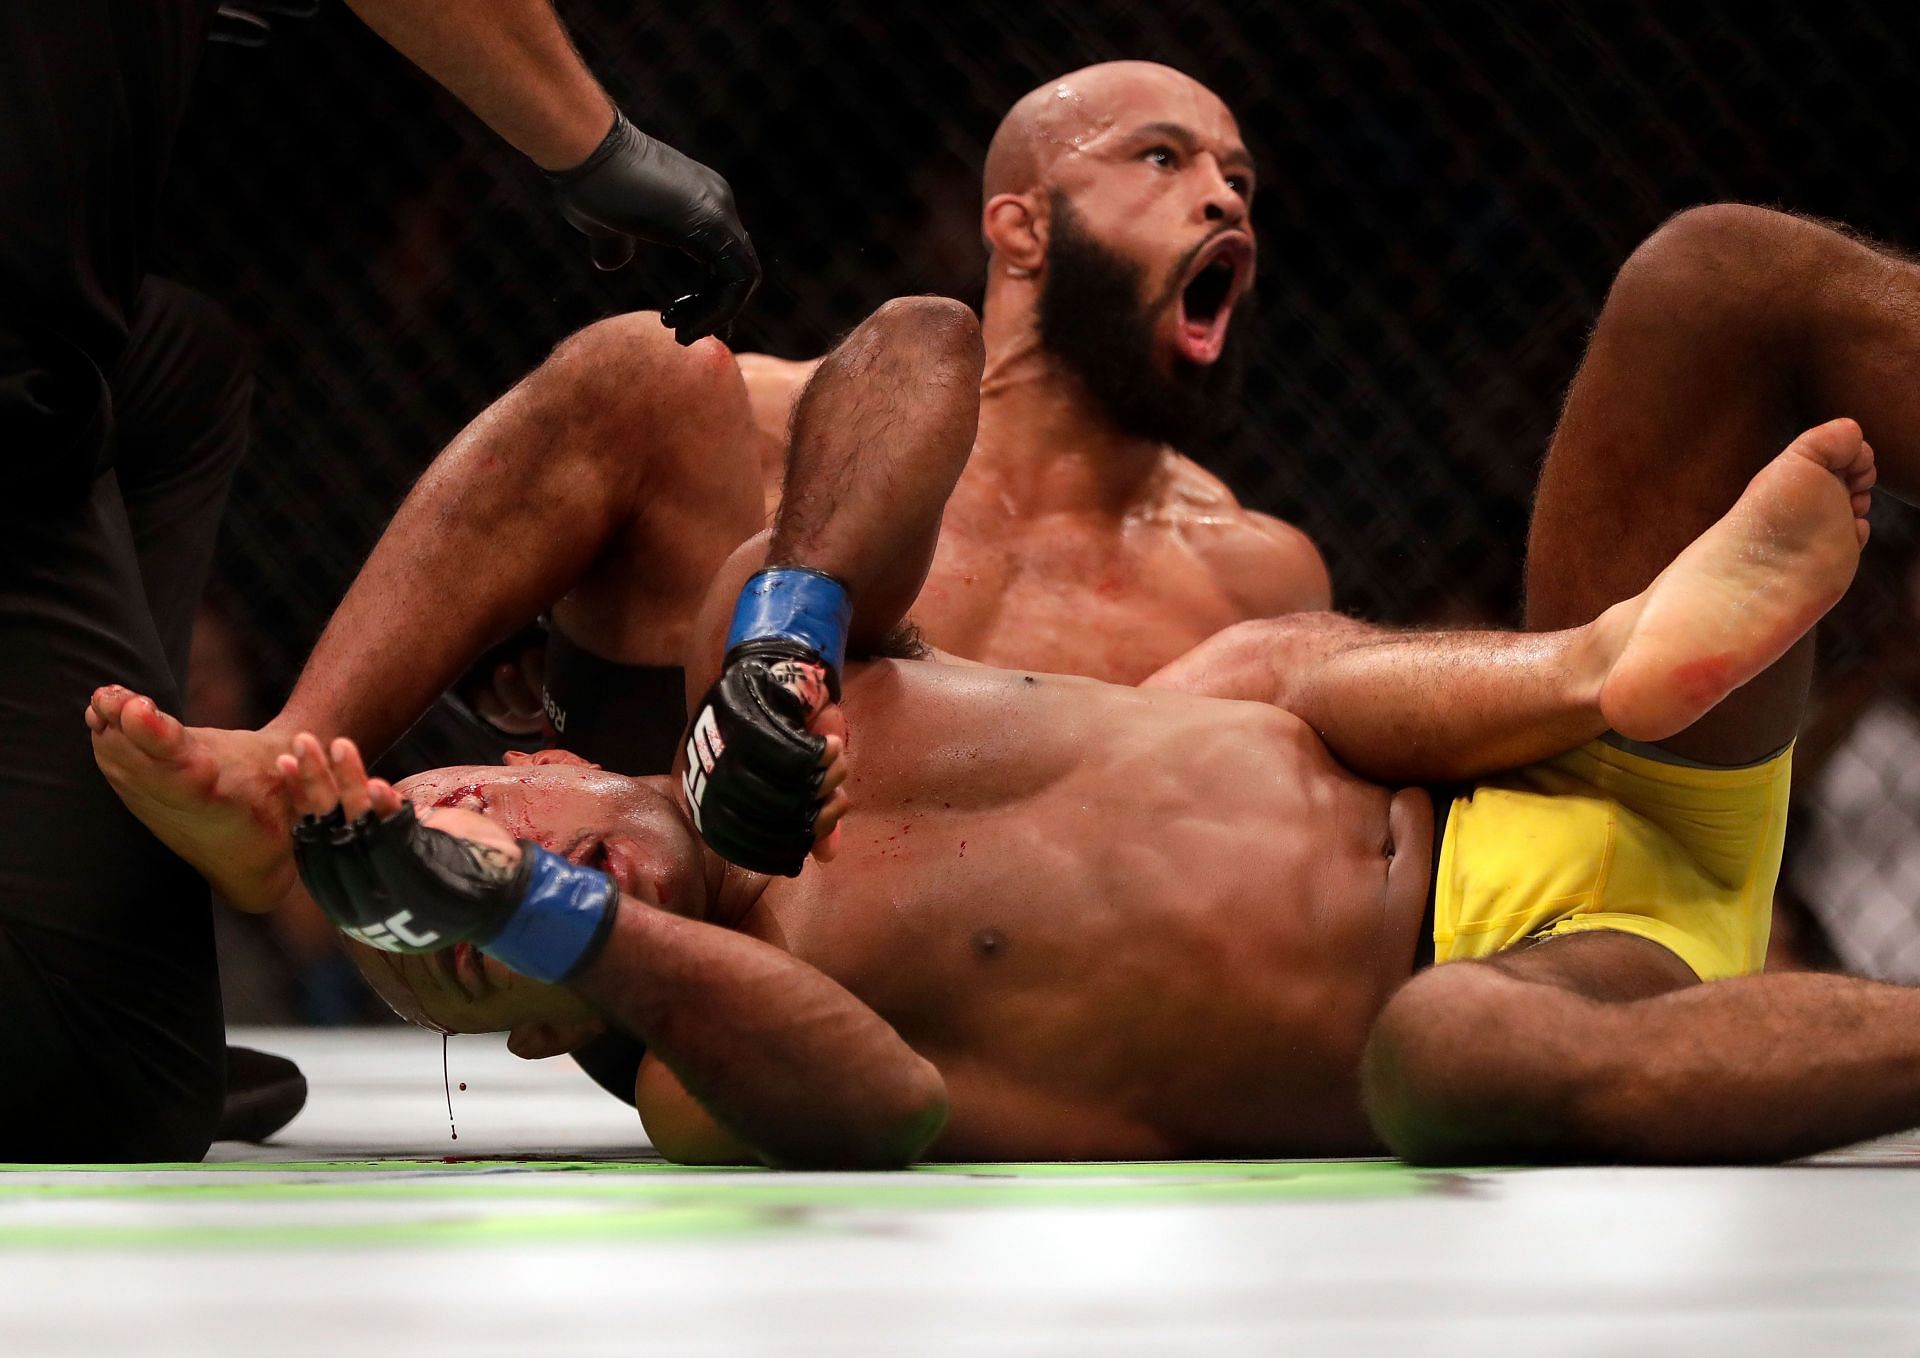 Demetrious Johnson now fights for ONE Championship